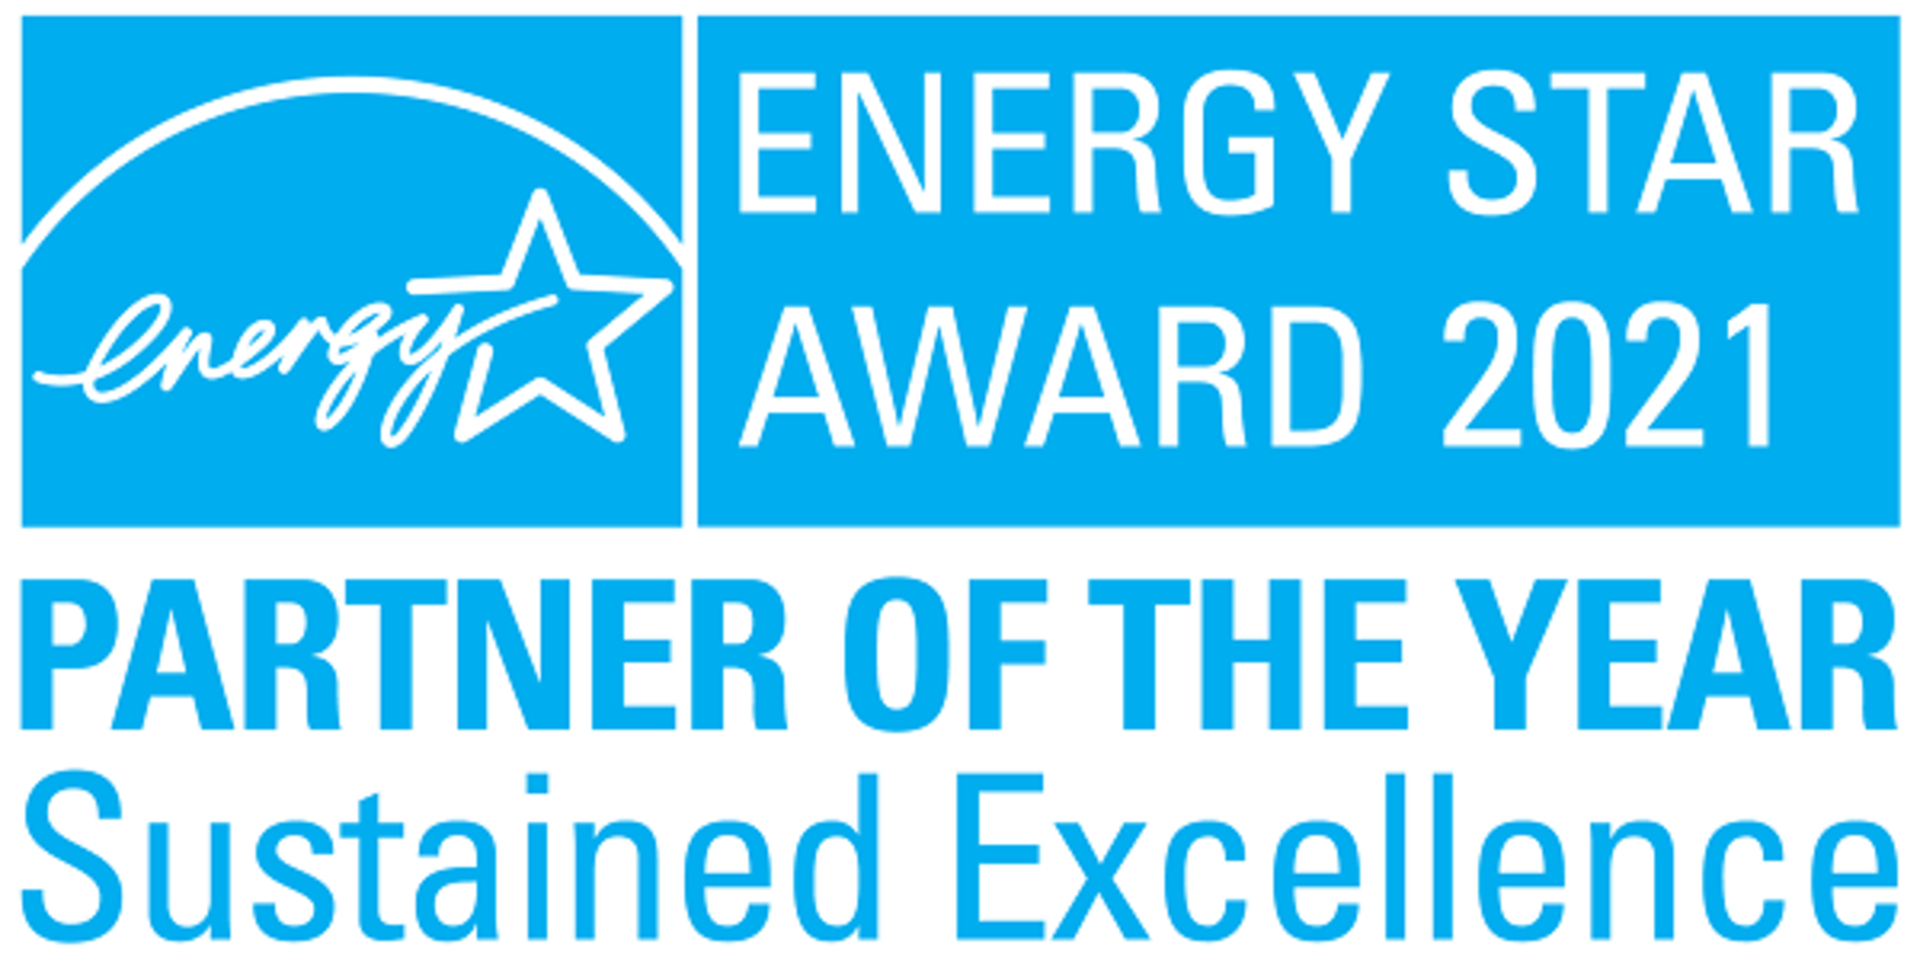 Atrium Health is proud to announce it has received the 2021 ENERGY STAR® Partner of the Year — Sustained Excellence Award from the U.S. Environmental Protection Agency and the U.S. Department of Energy for the fourth consecutive year.  